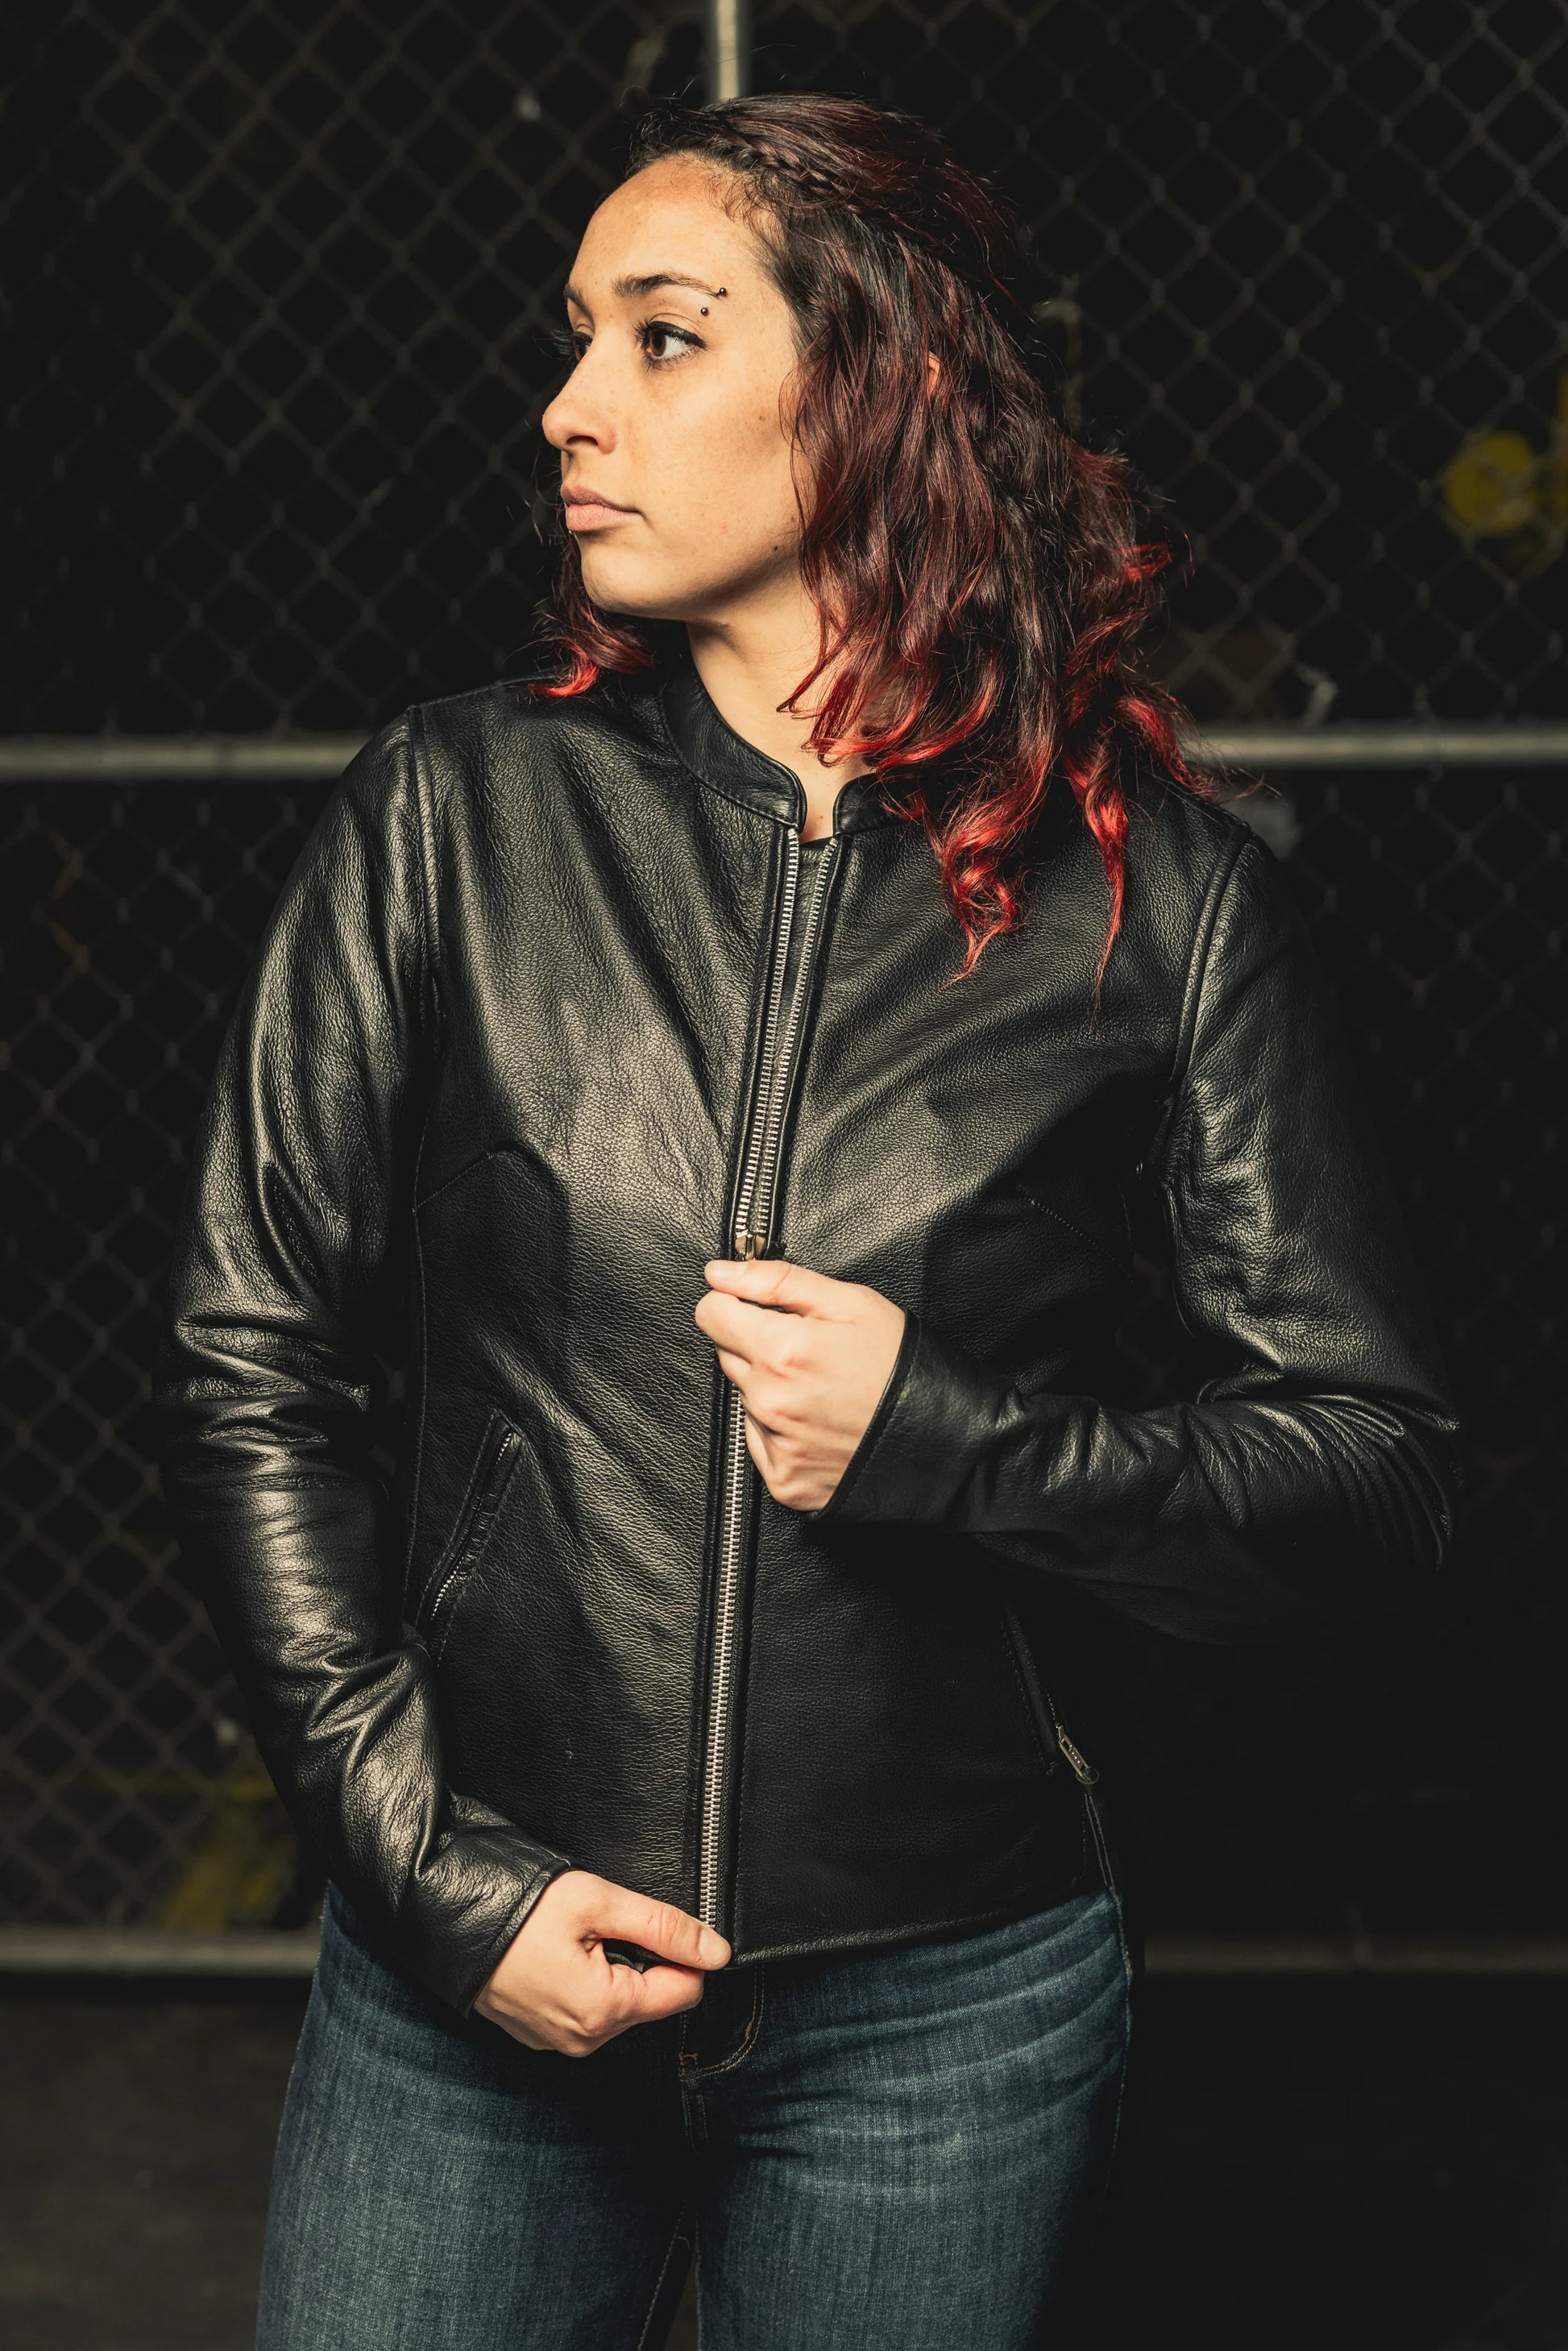  Woman wearing Flashback Leather Motorcycle Jacket, holding it closed, emphasizing the tailored fit and design.